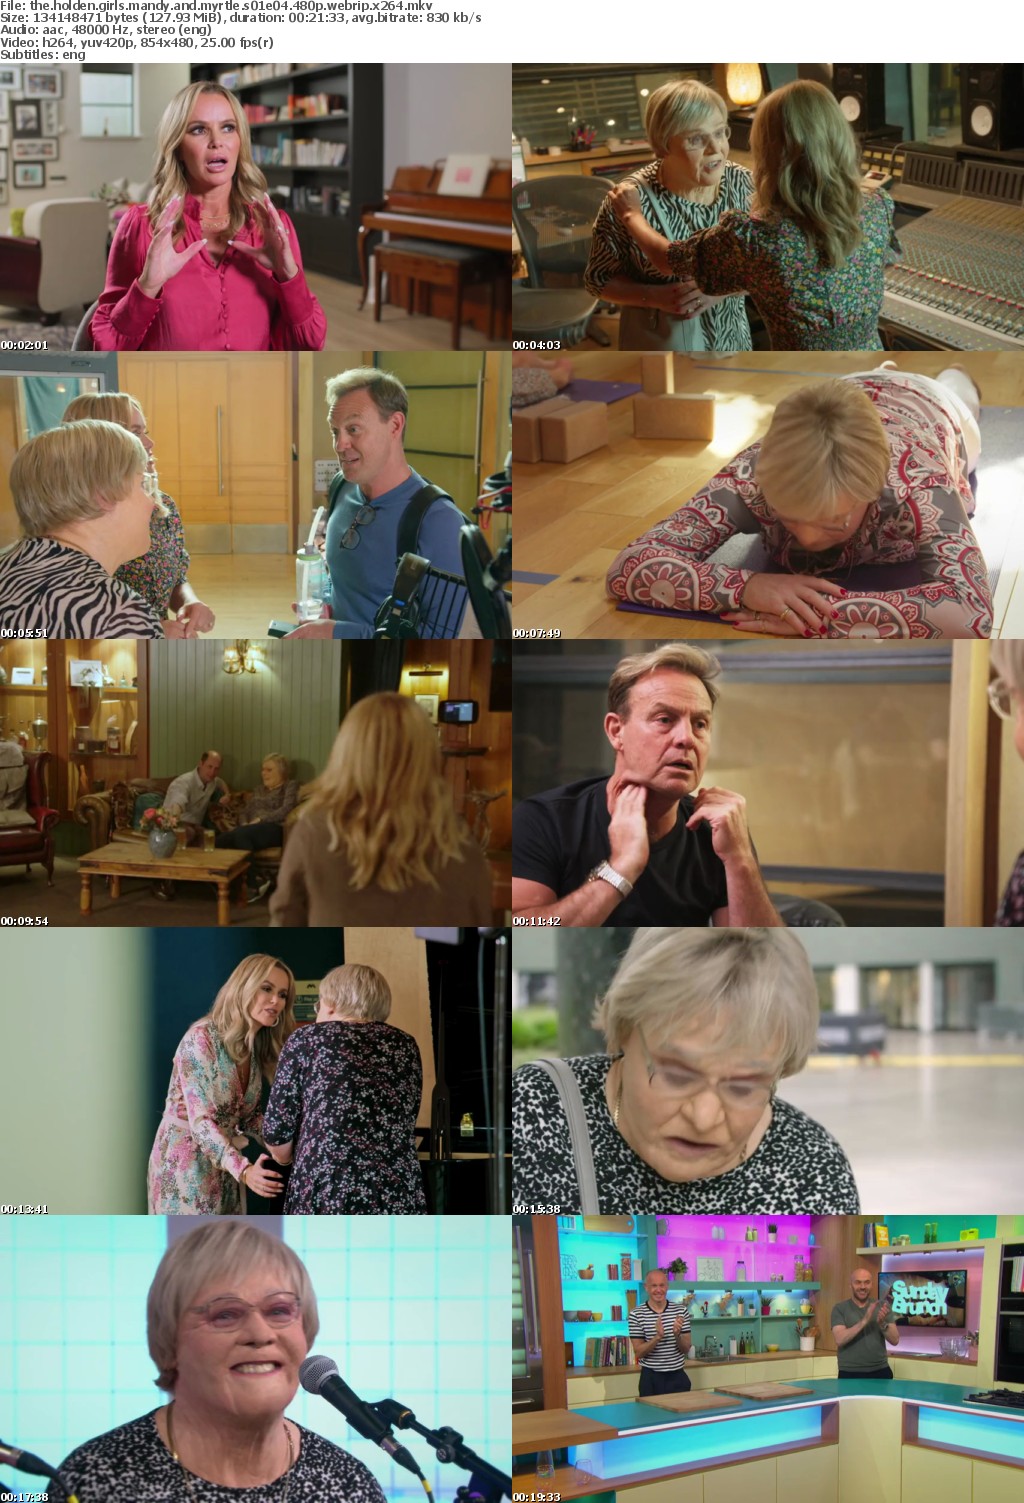 The Holden Girls Mandy and Myrtle S01 Complete 480p WEBRip x264